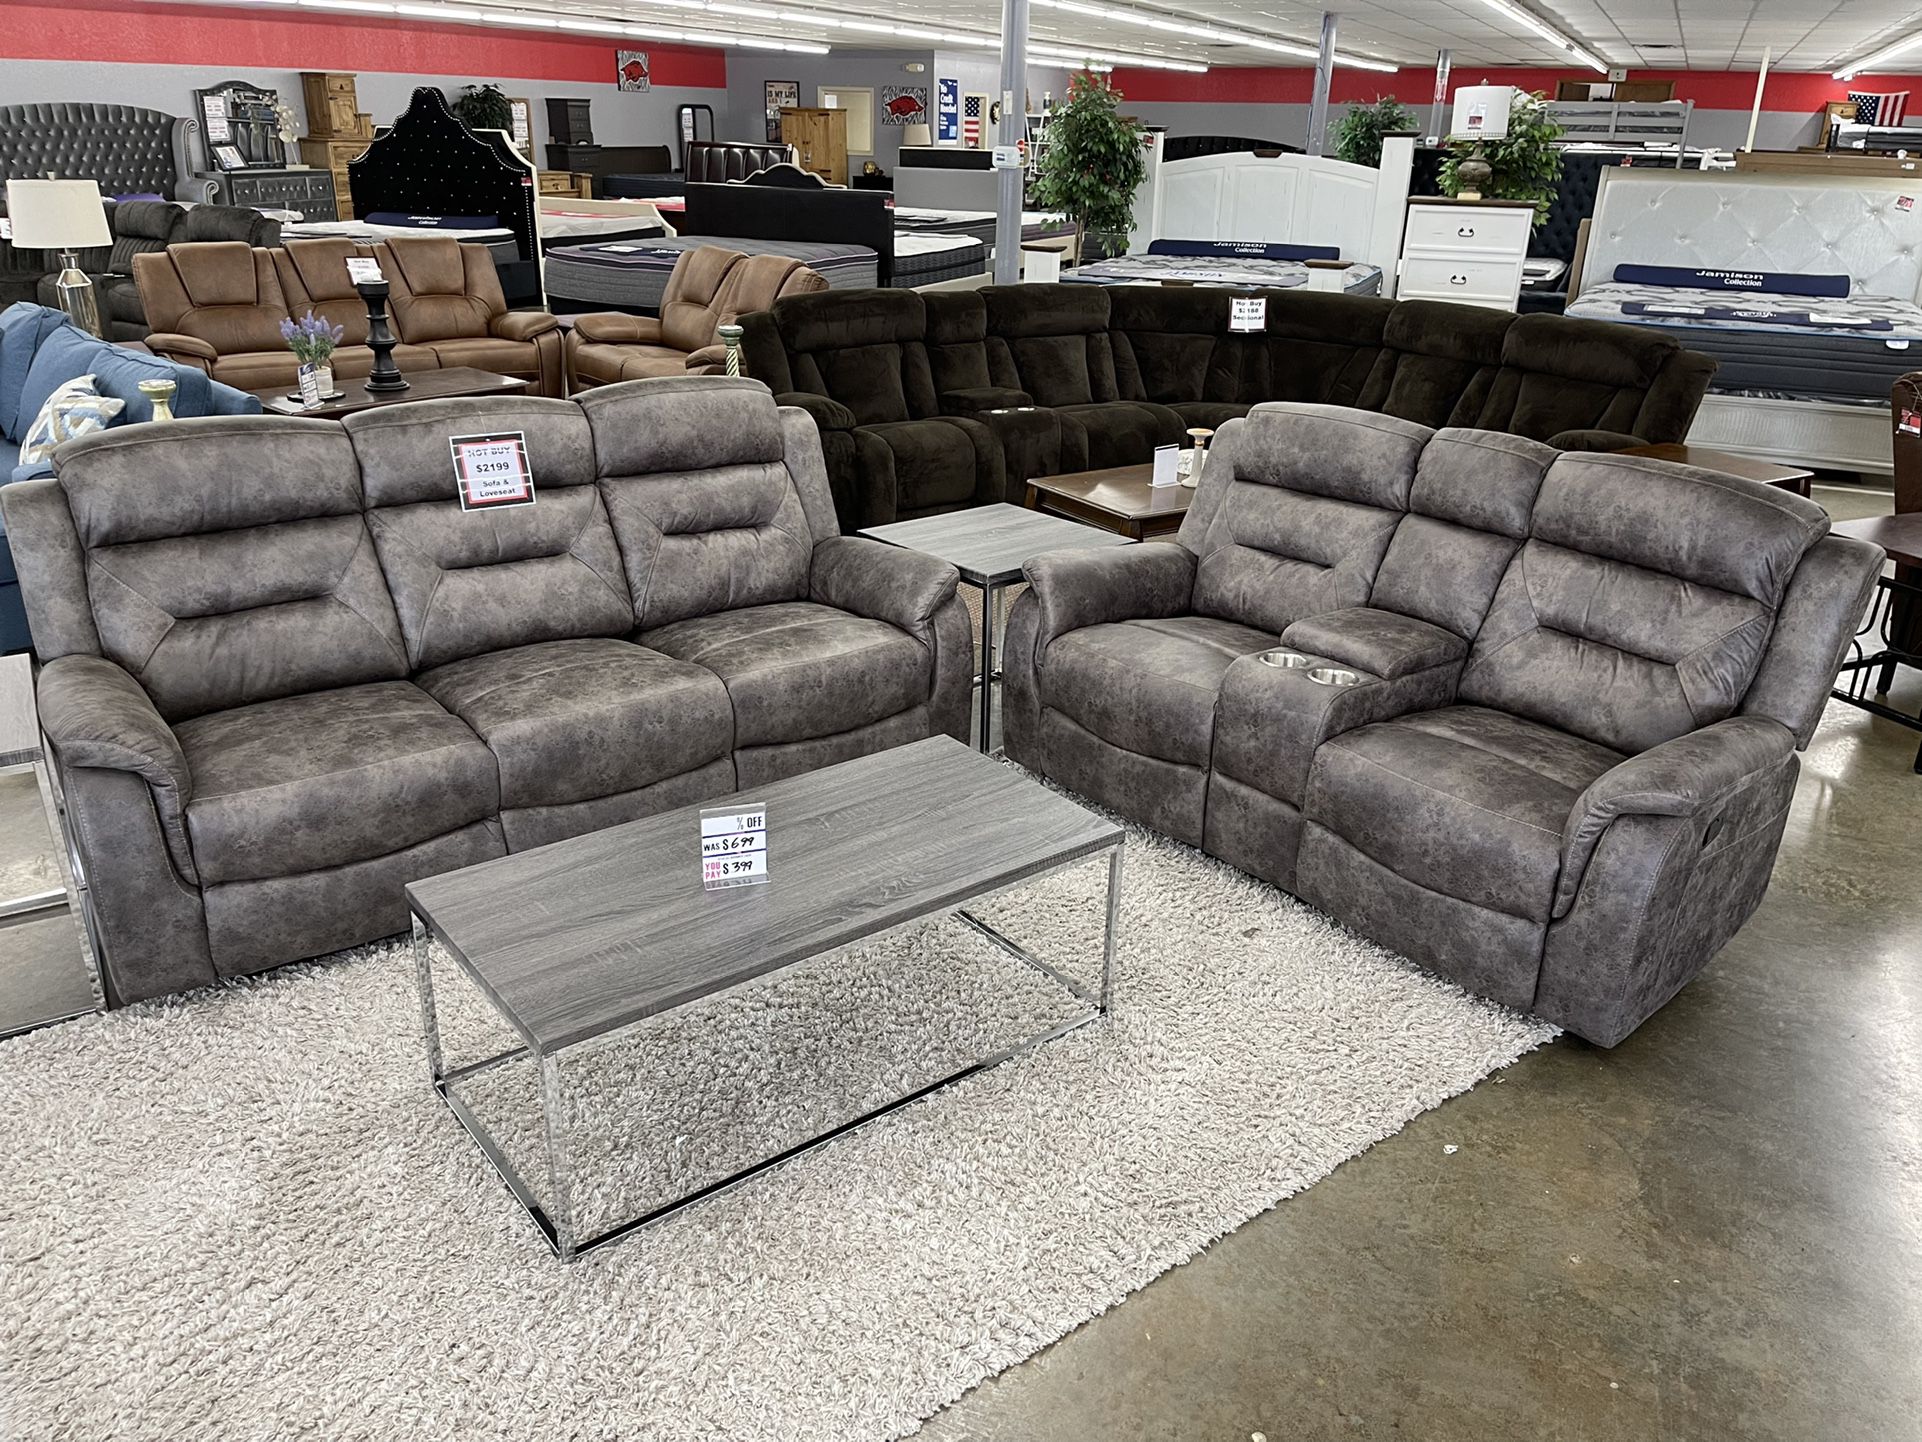 Double Reclining Sofa And Love Seat Combo On Sale Now For Only $1888!  $39 Down Everyone Is Approved!! 